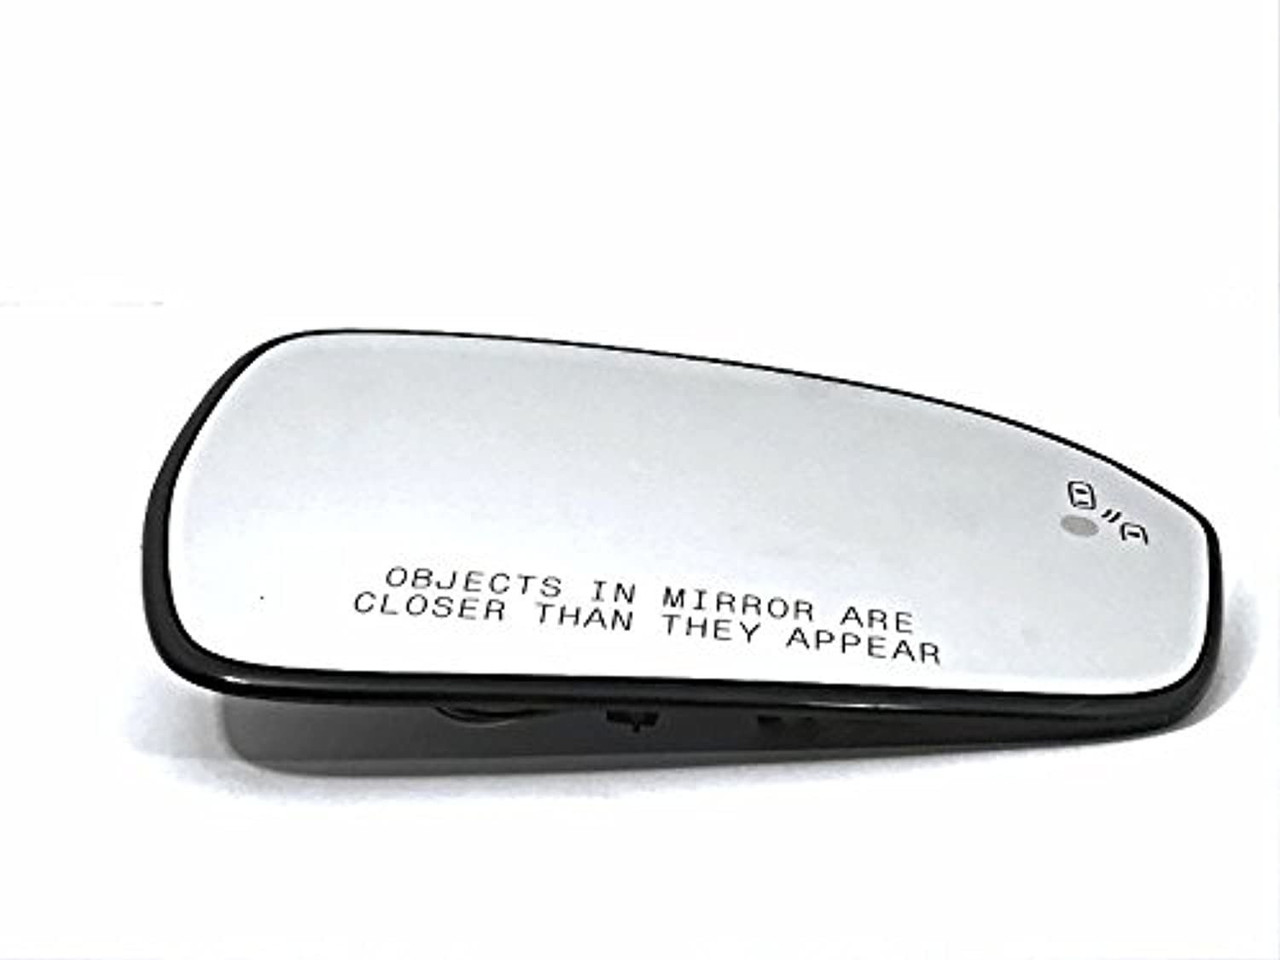 Fits 13-20 Fusion Right Pass Mirror Glass Heated w/Blind Spot Detect Rear Holder